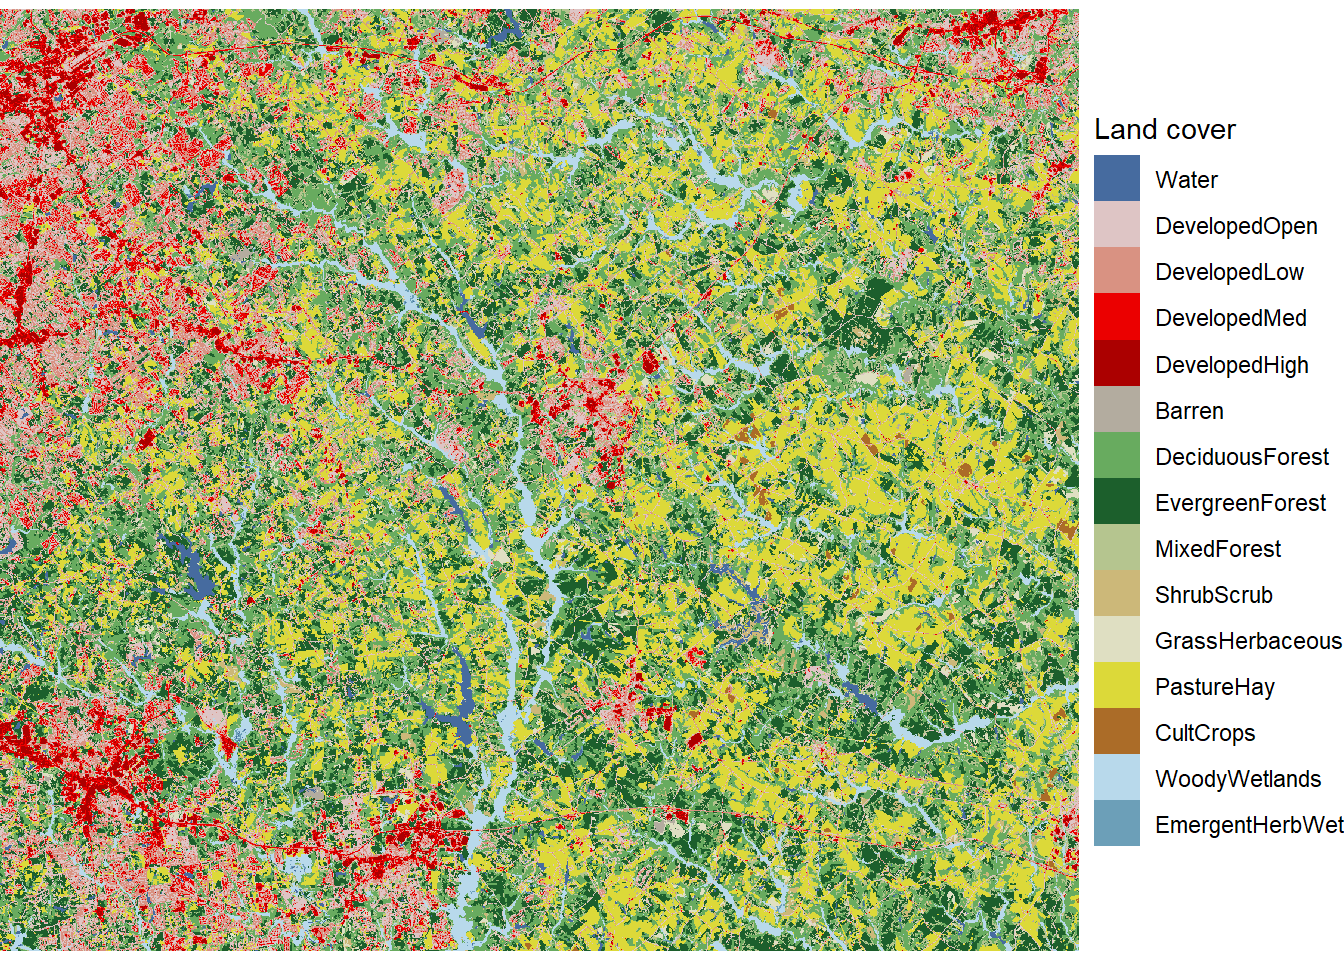 Land cover map with unique colors and labels for every land cover class.